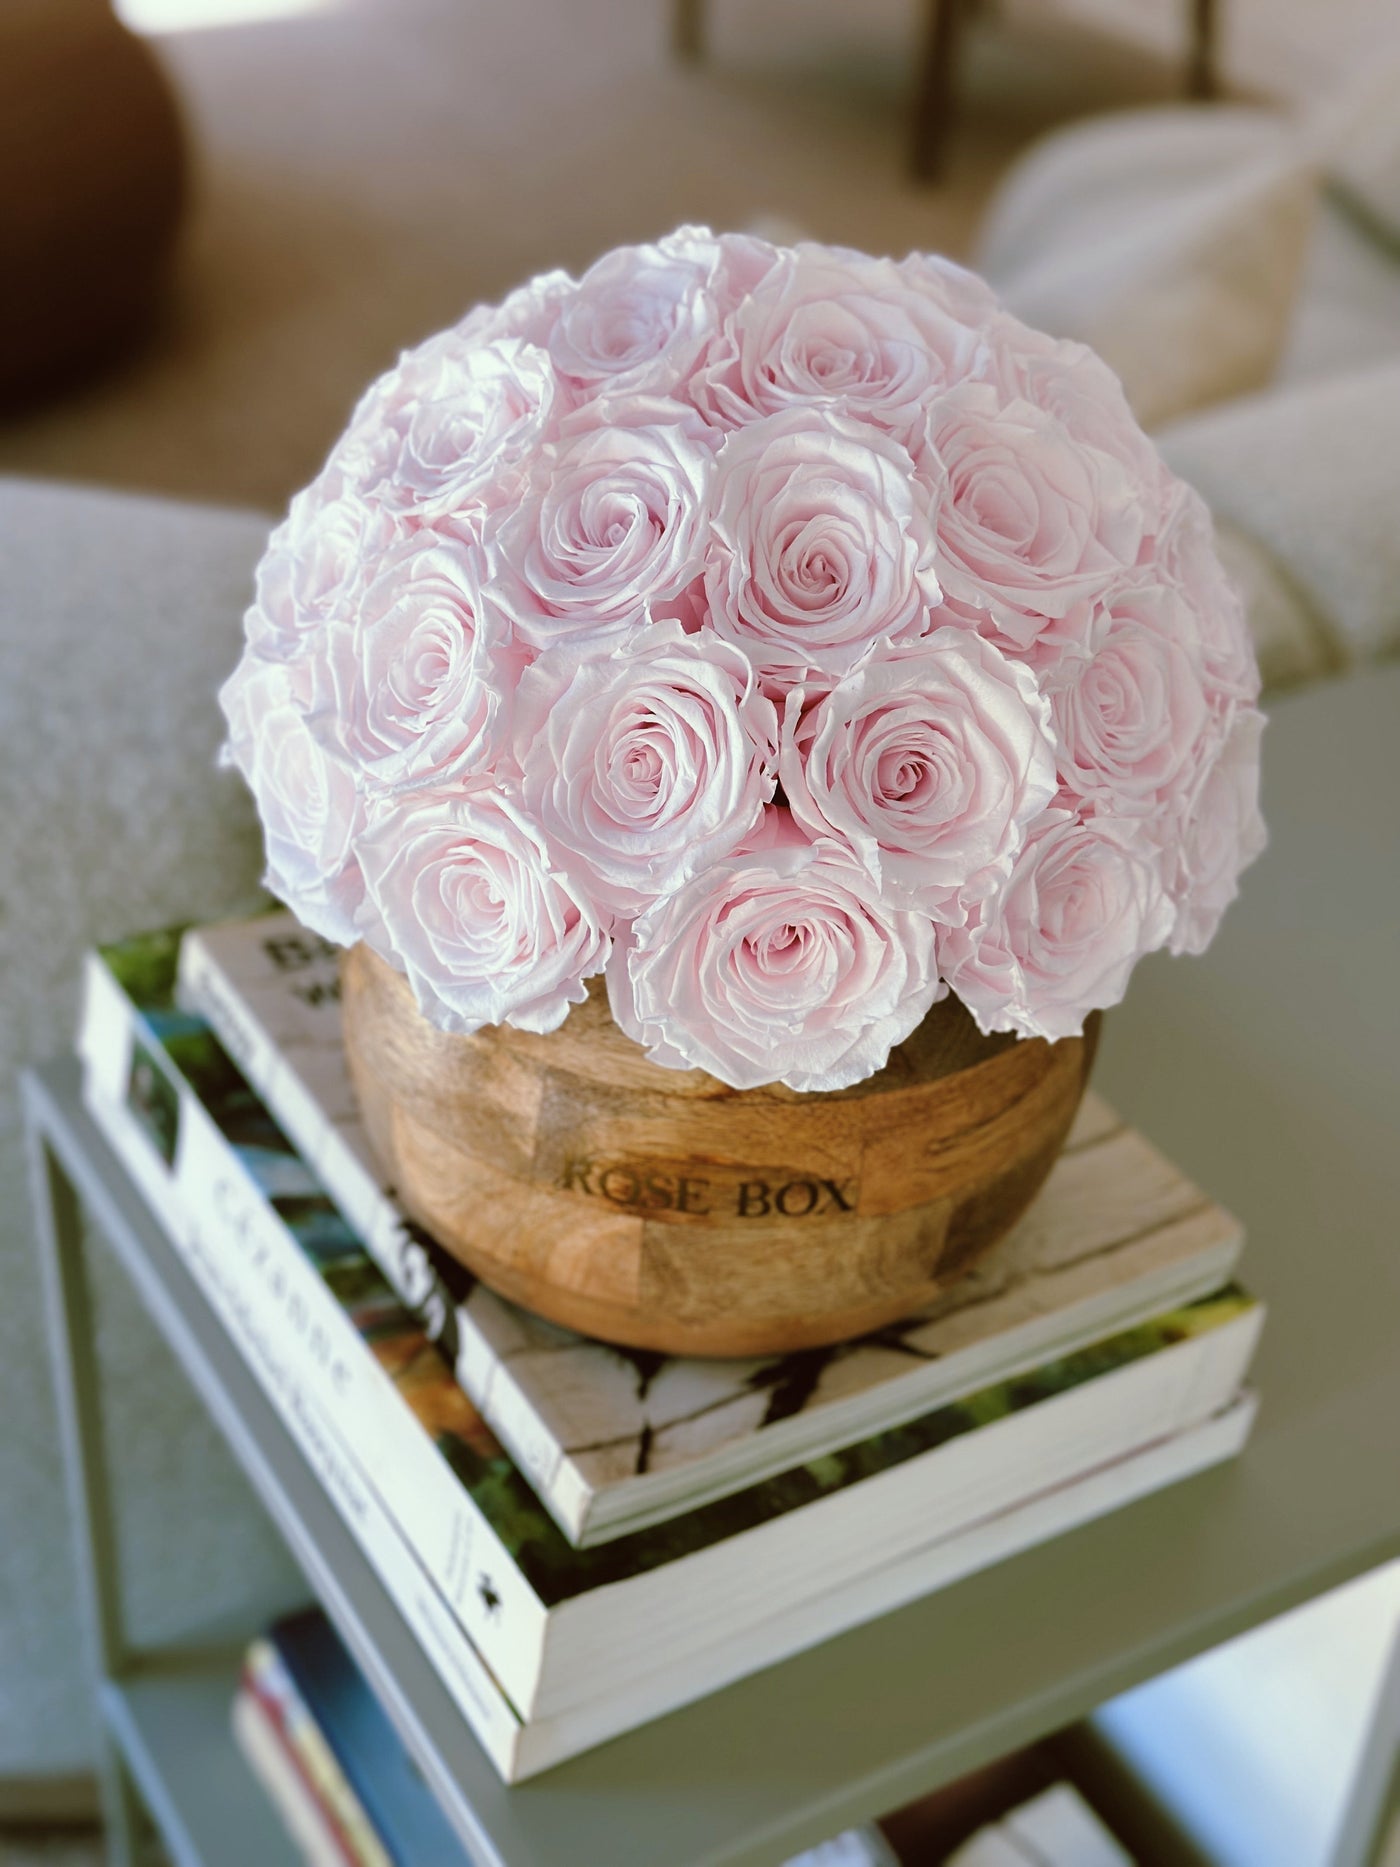 Rustic Classic Round Half Ball with Pure White Roses